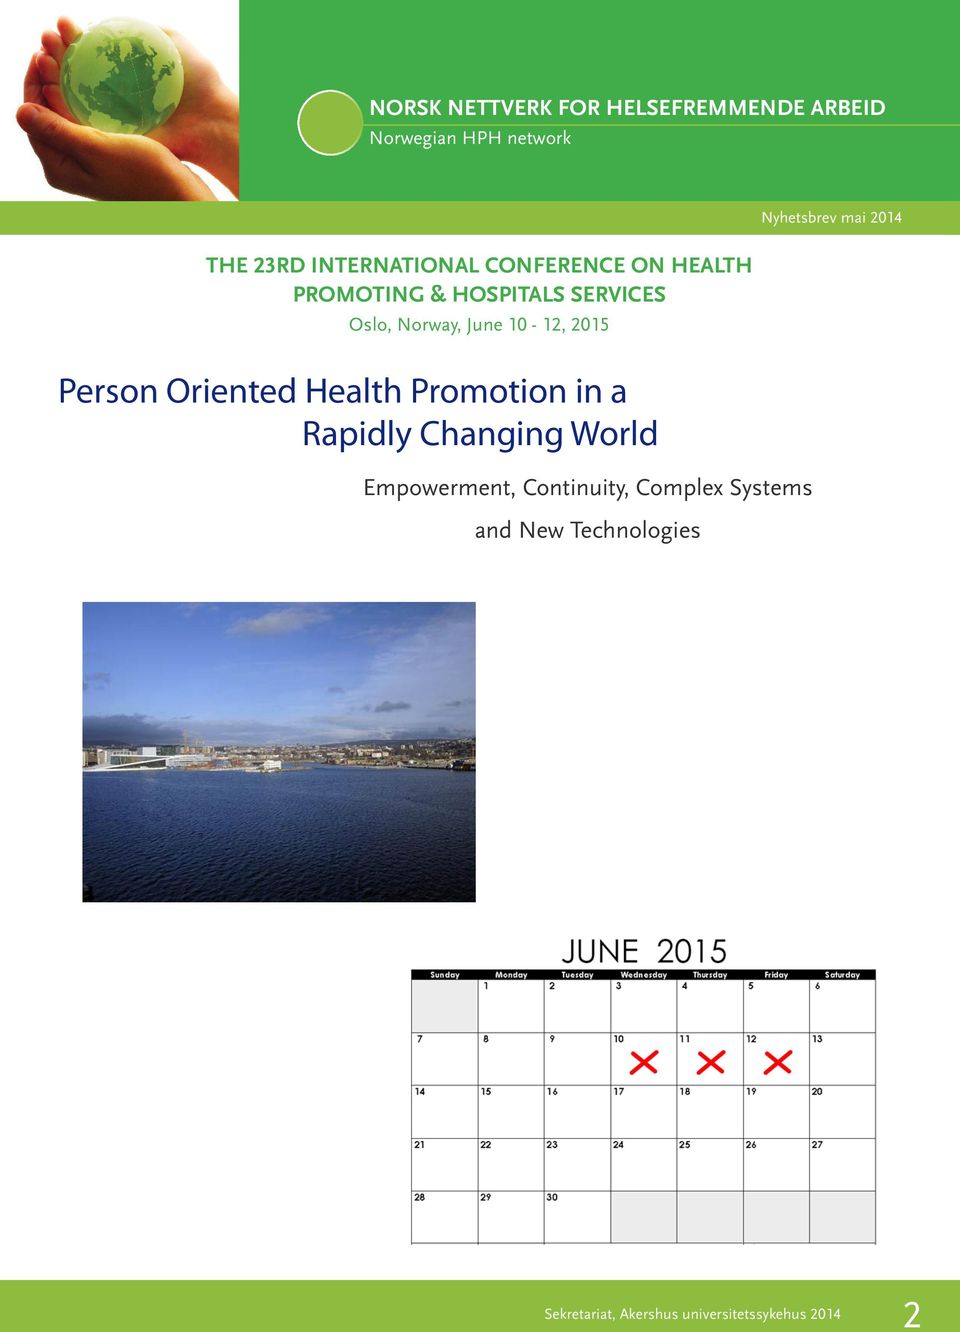 Oriented Health Promotion in a Rapidly Changing World